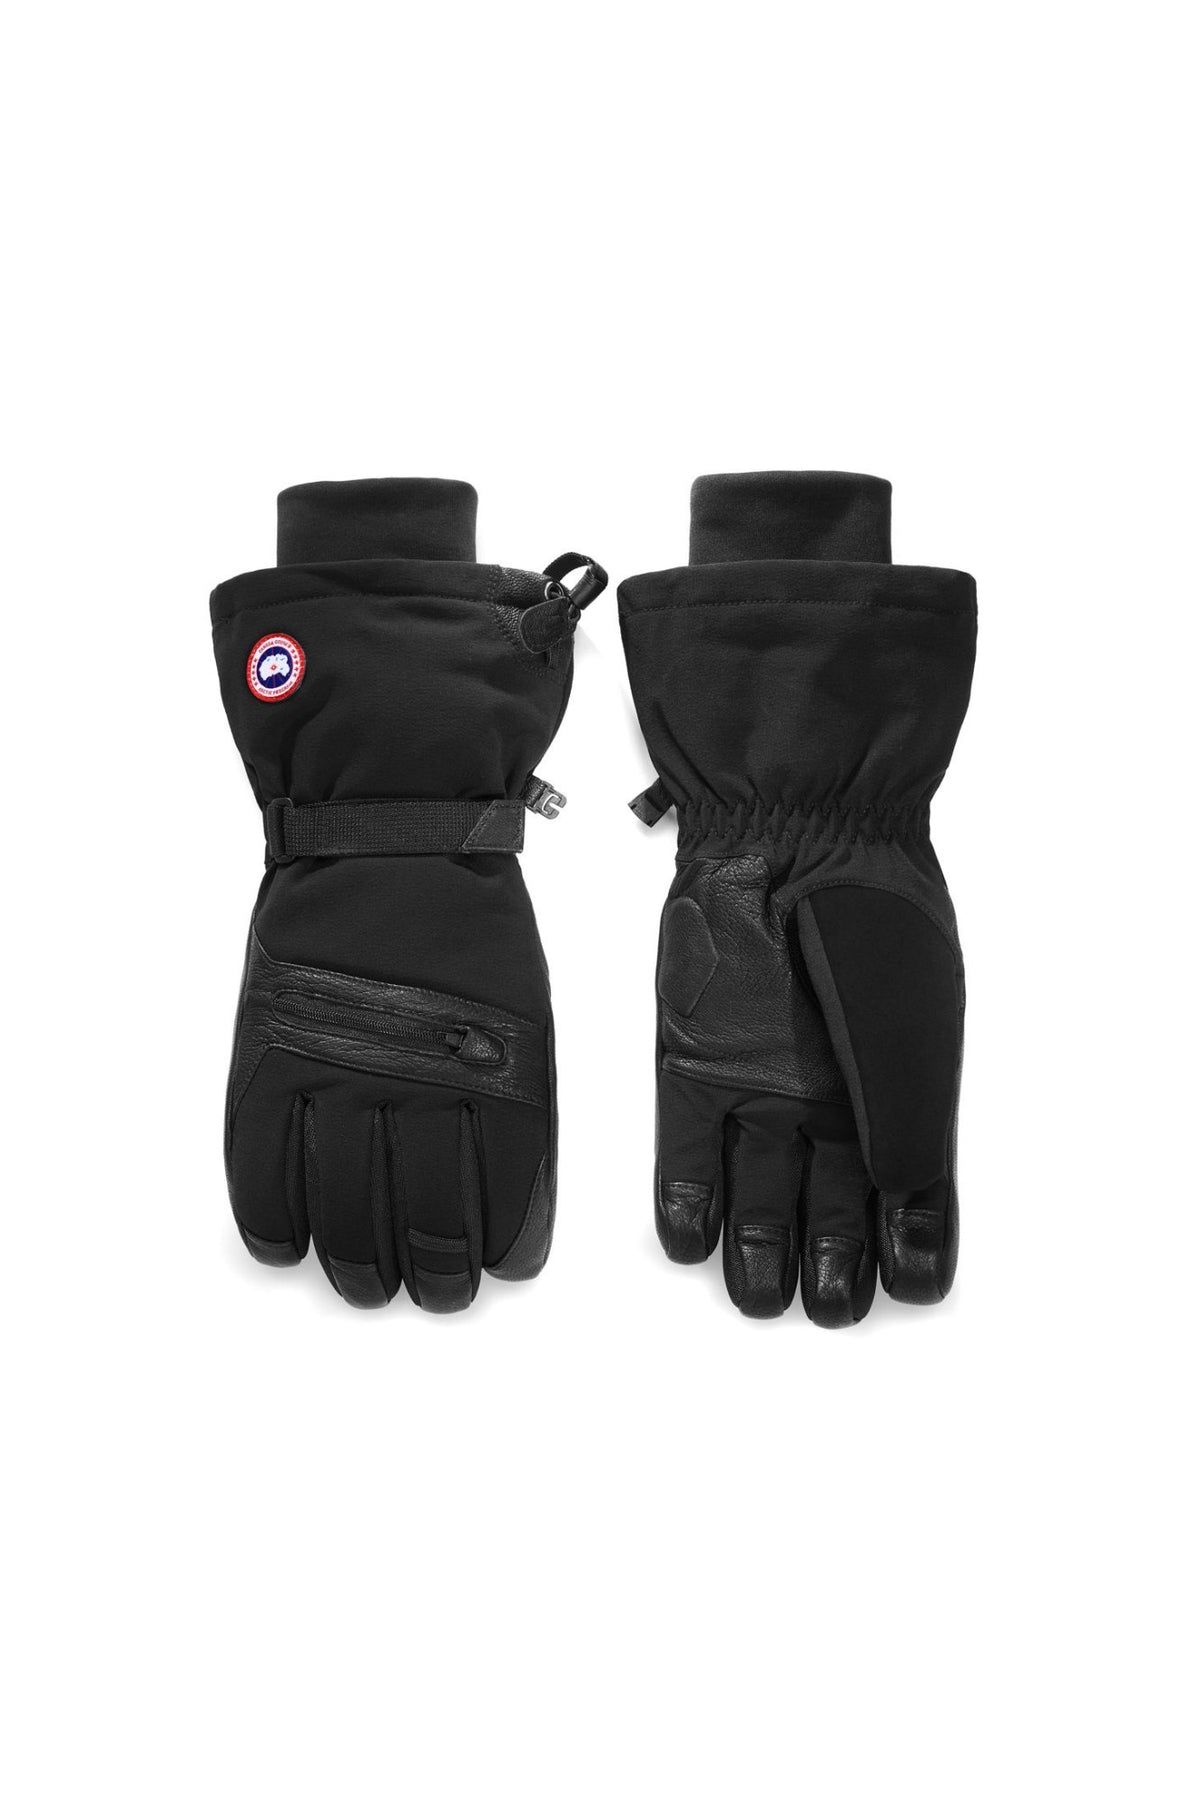 CANADA GOOSE - NORTHERN UTILITY GLOVES